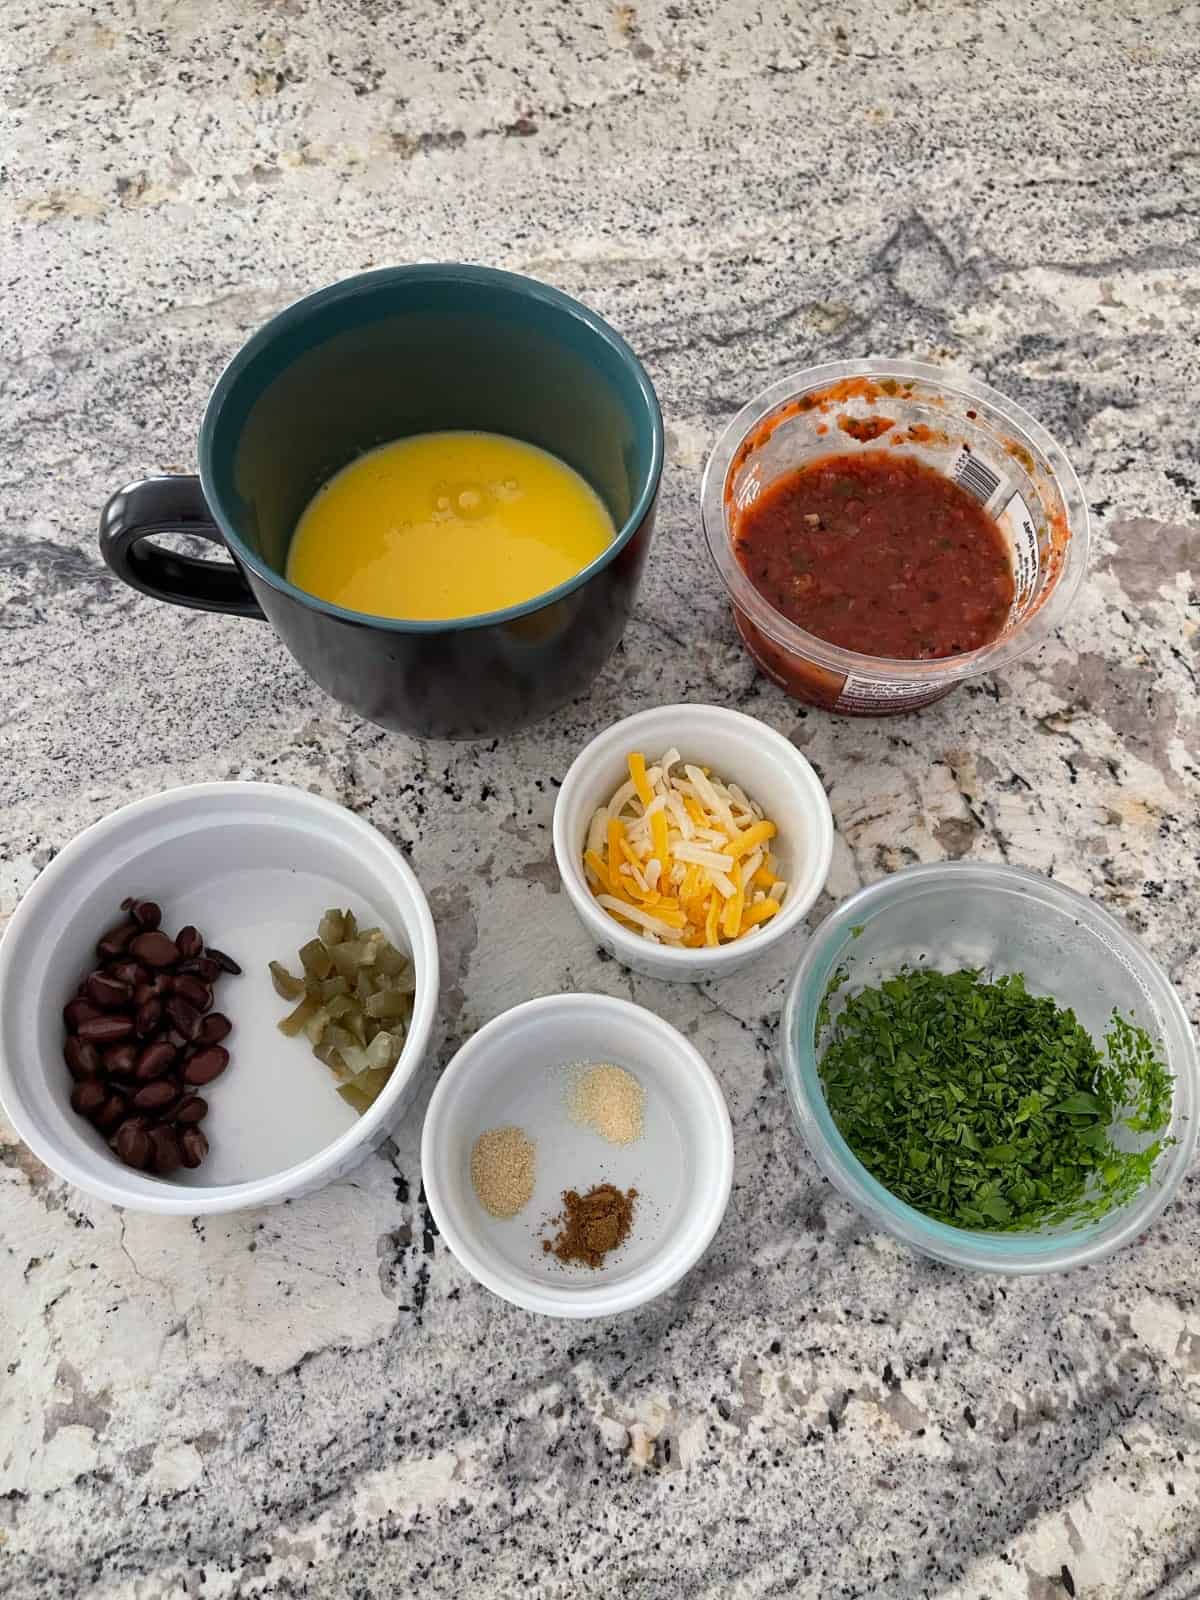 Ingredients for making Tex Mex Egg Mug including liquid egg substitute, salsa, shredded cheese, chopped cilantro, black beans, chopped jalapeños and spices.